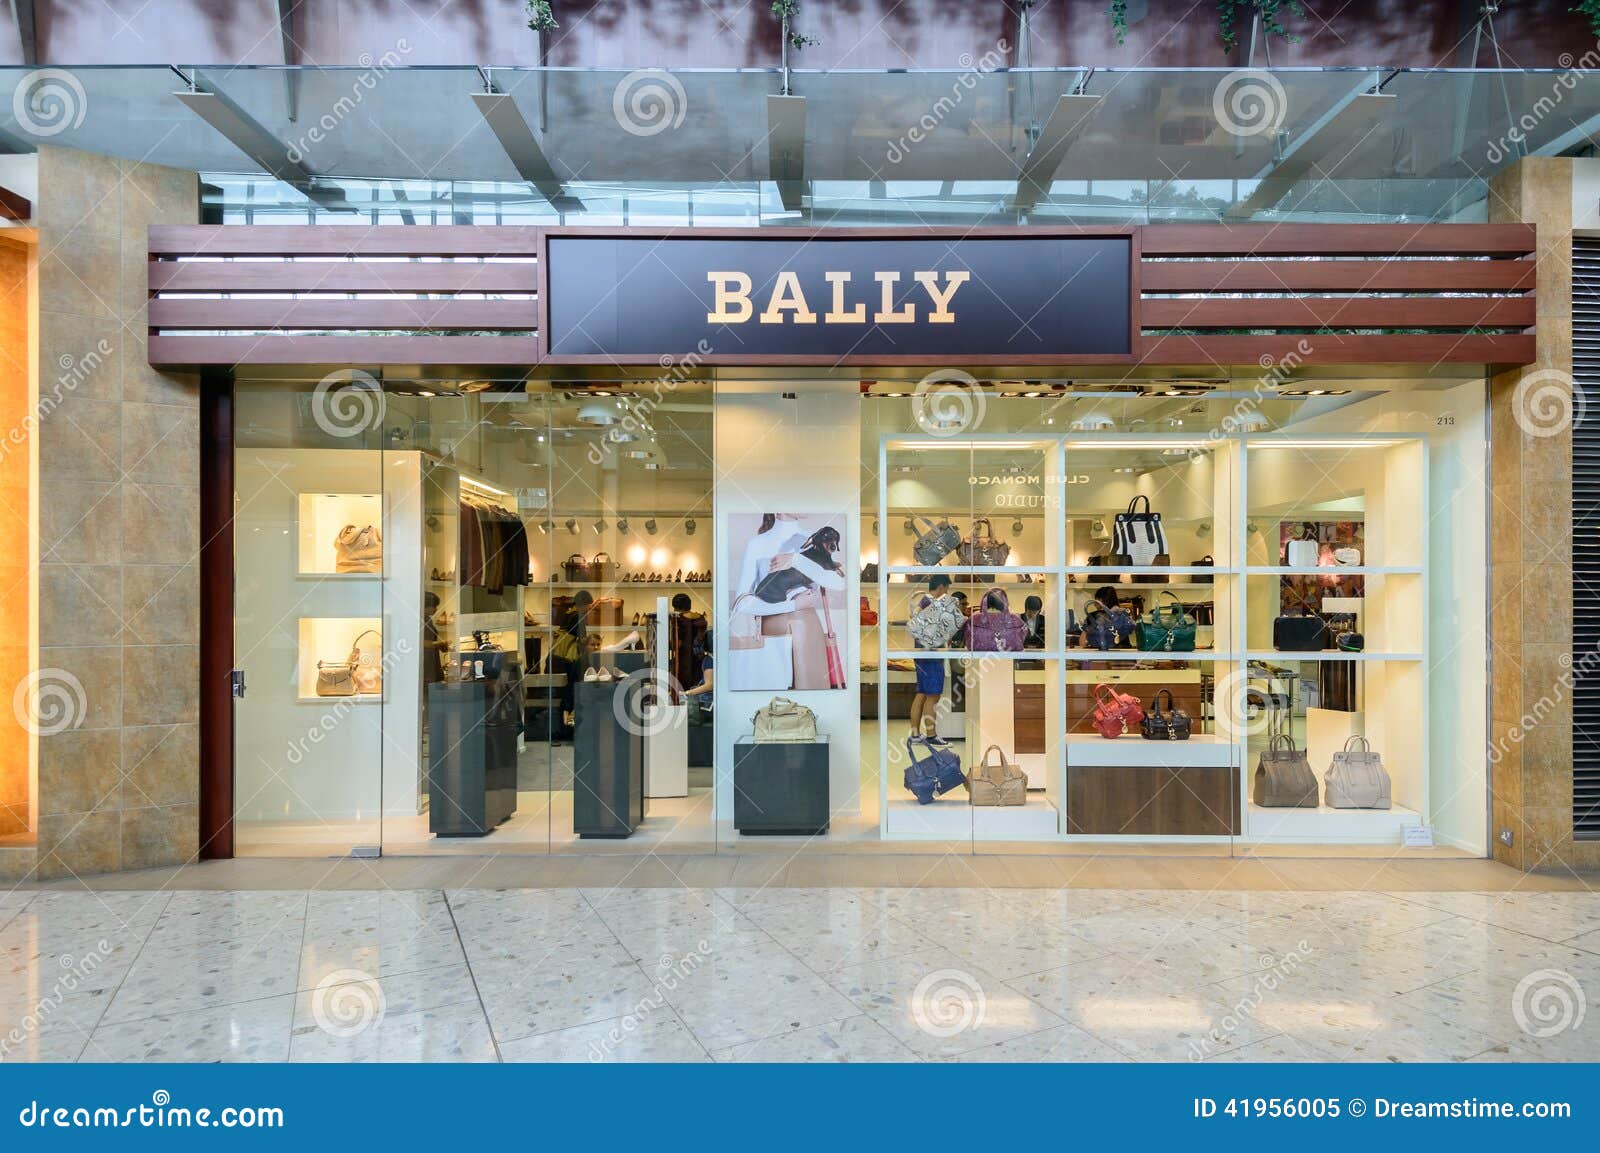 Bally Shop at City Gate Outlet Editorial Image - Image of building,  display: 41956005